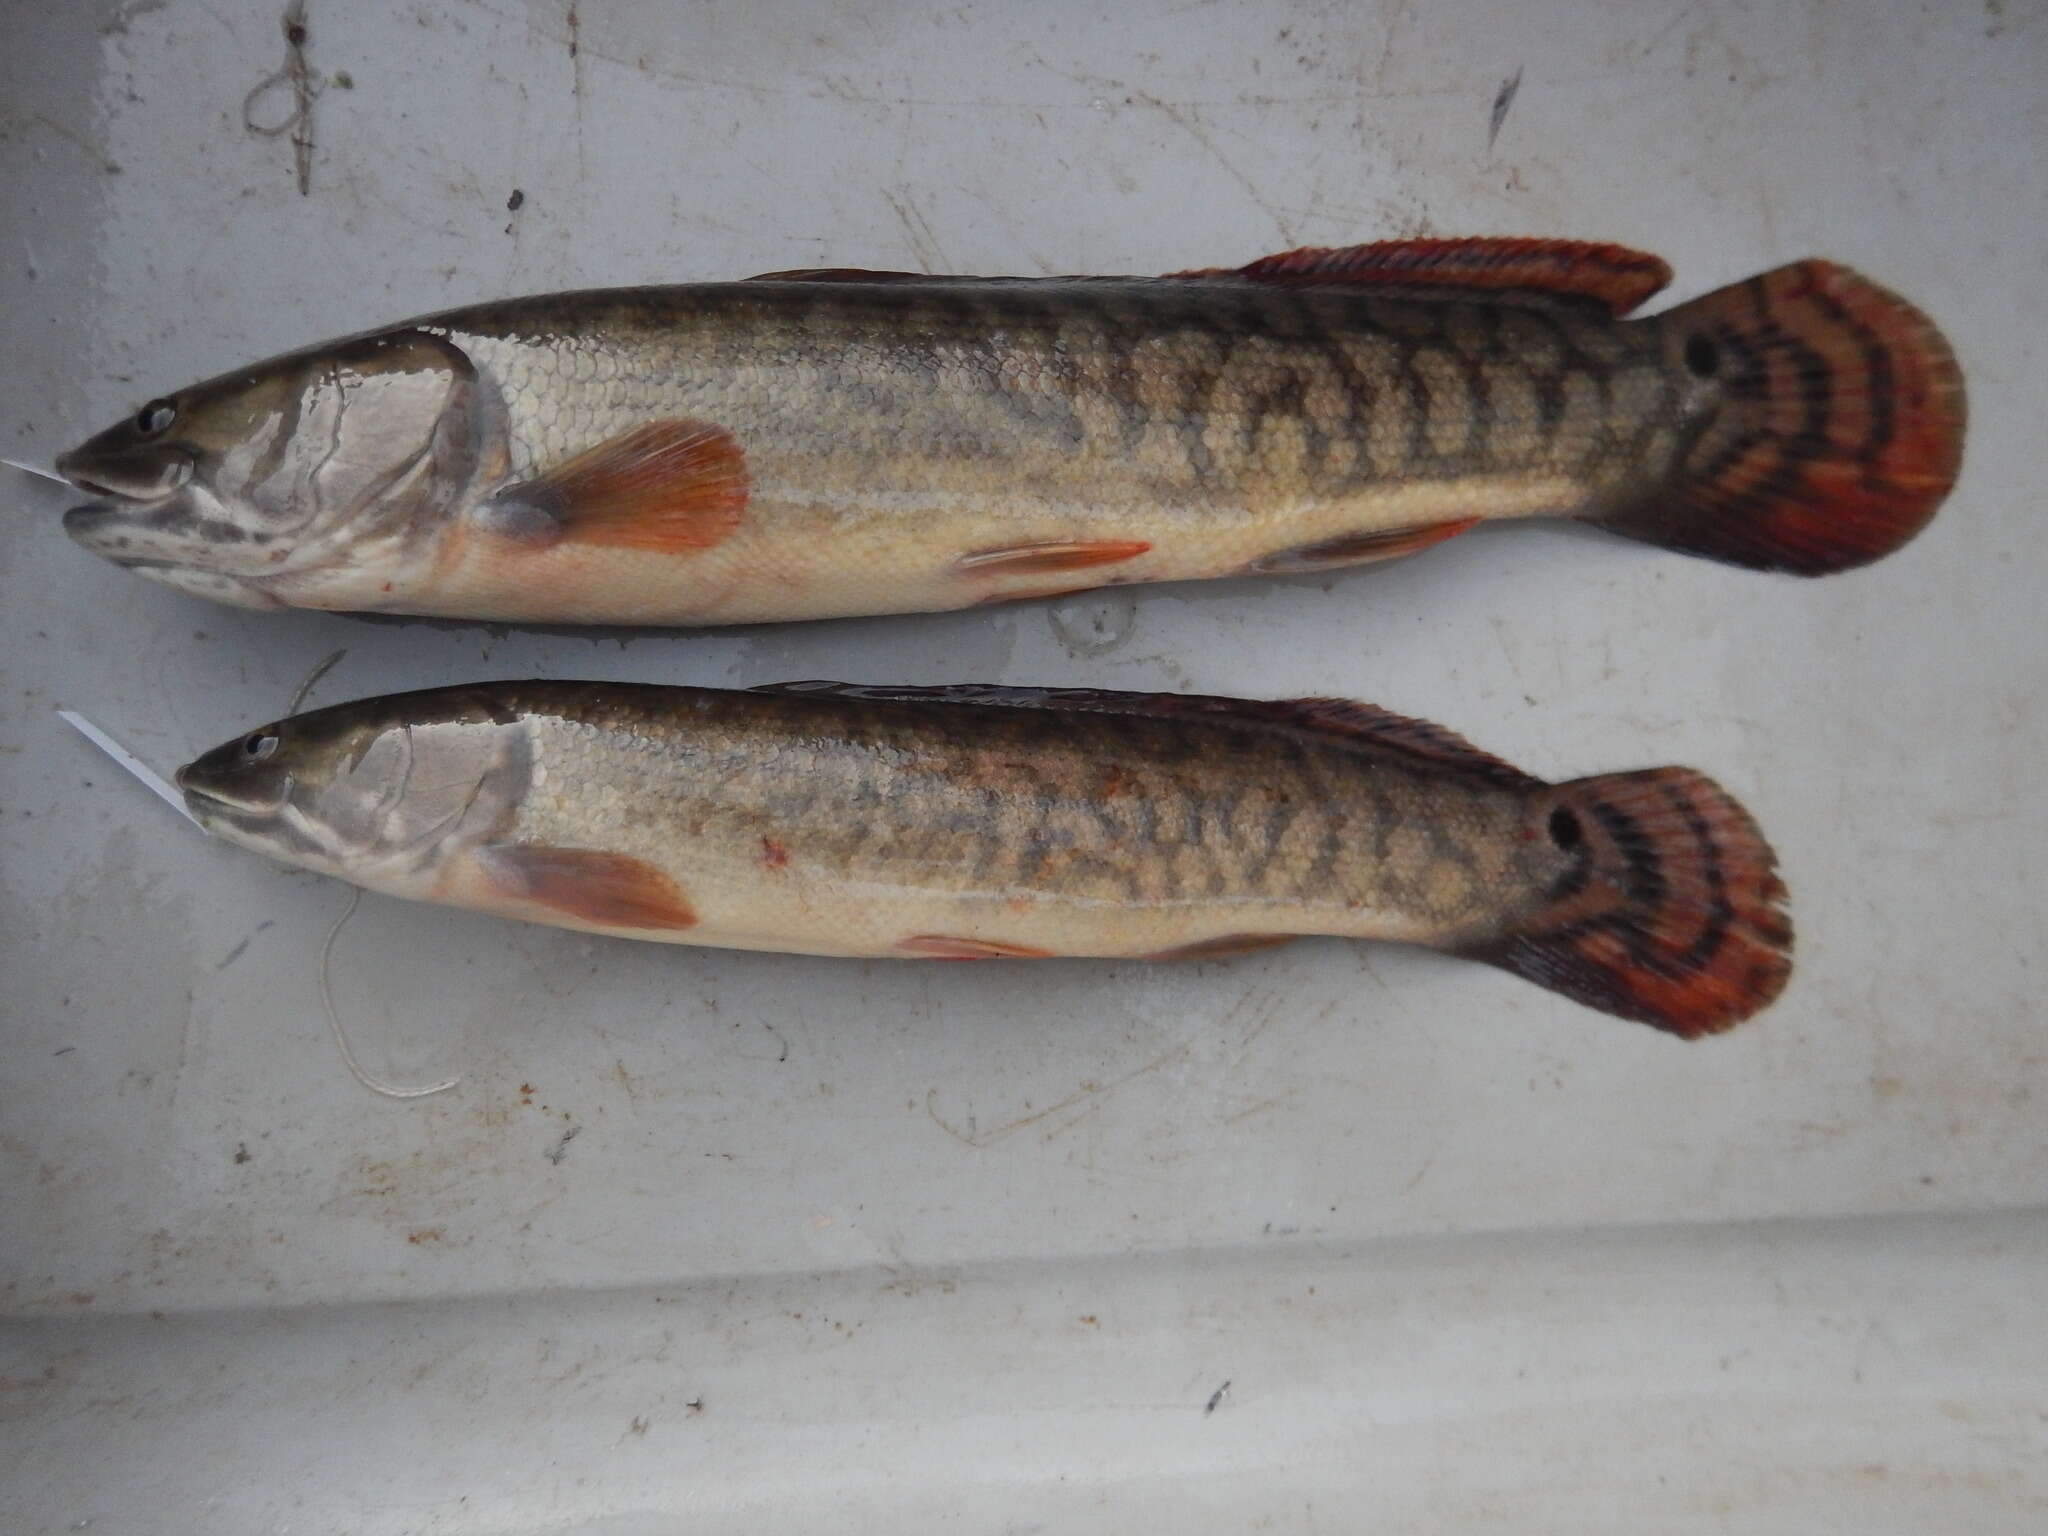 Image of bowfins